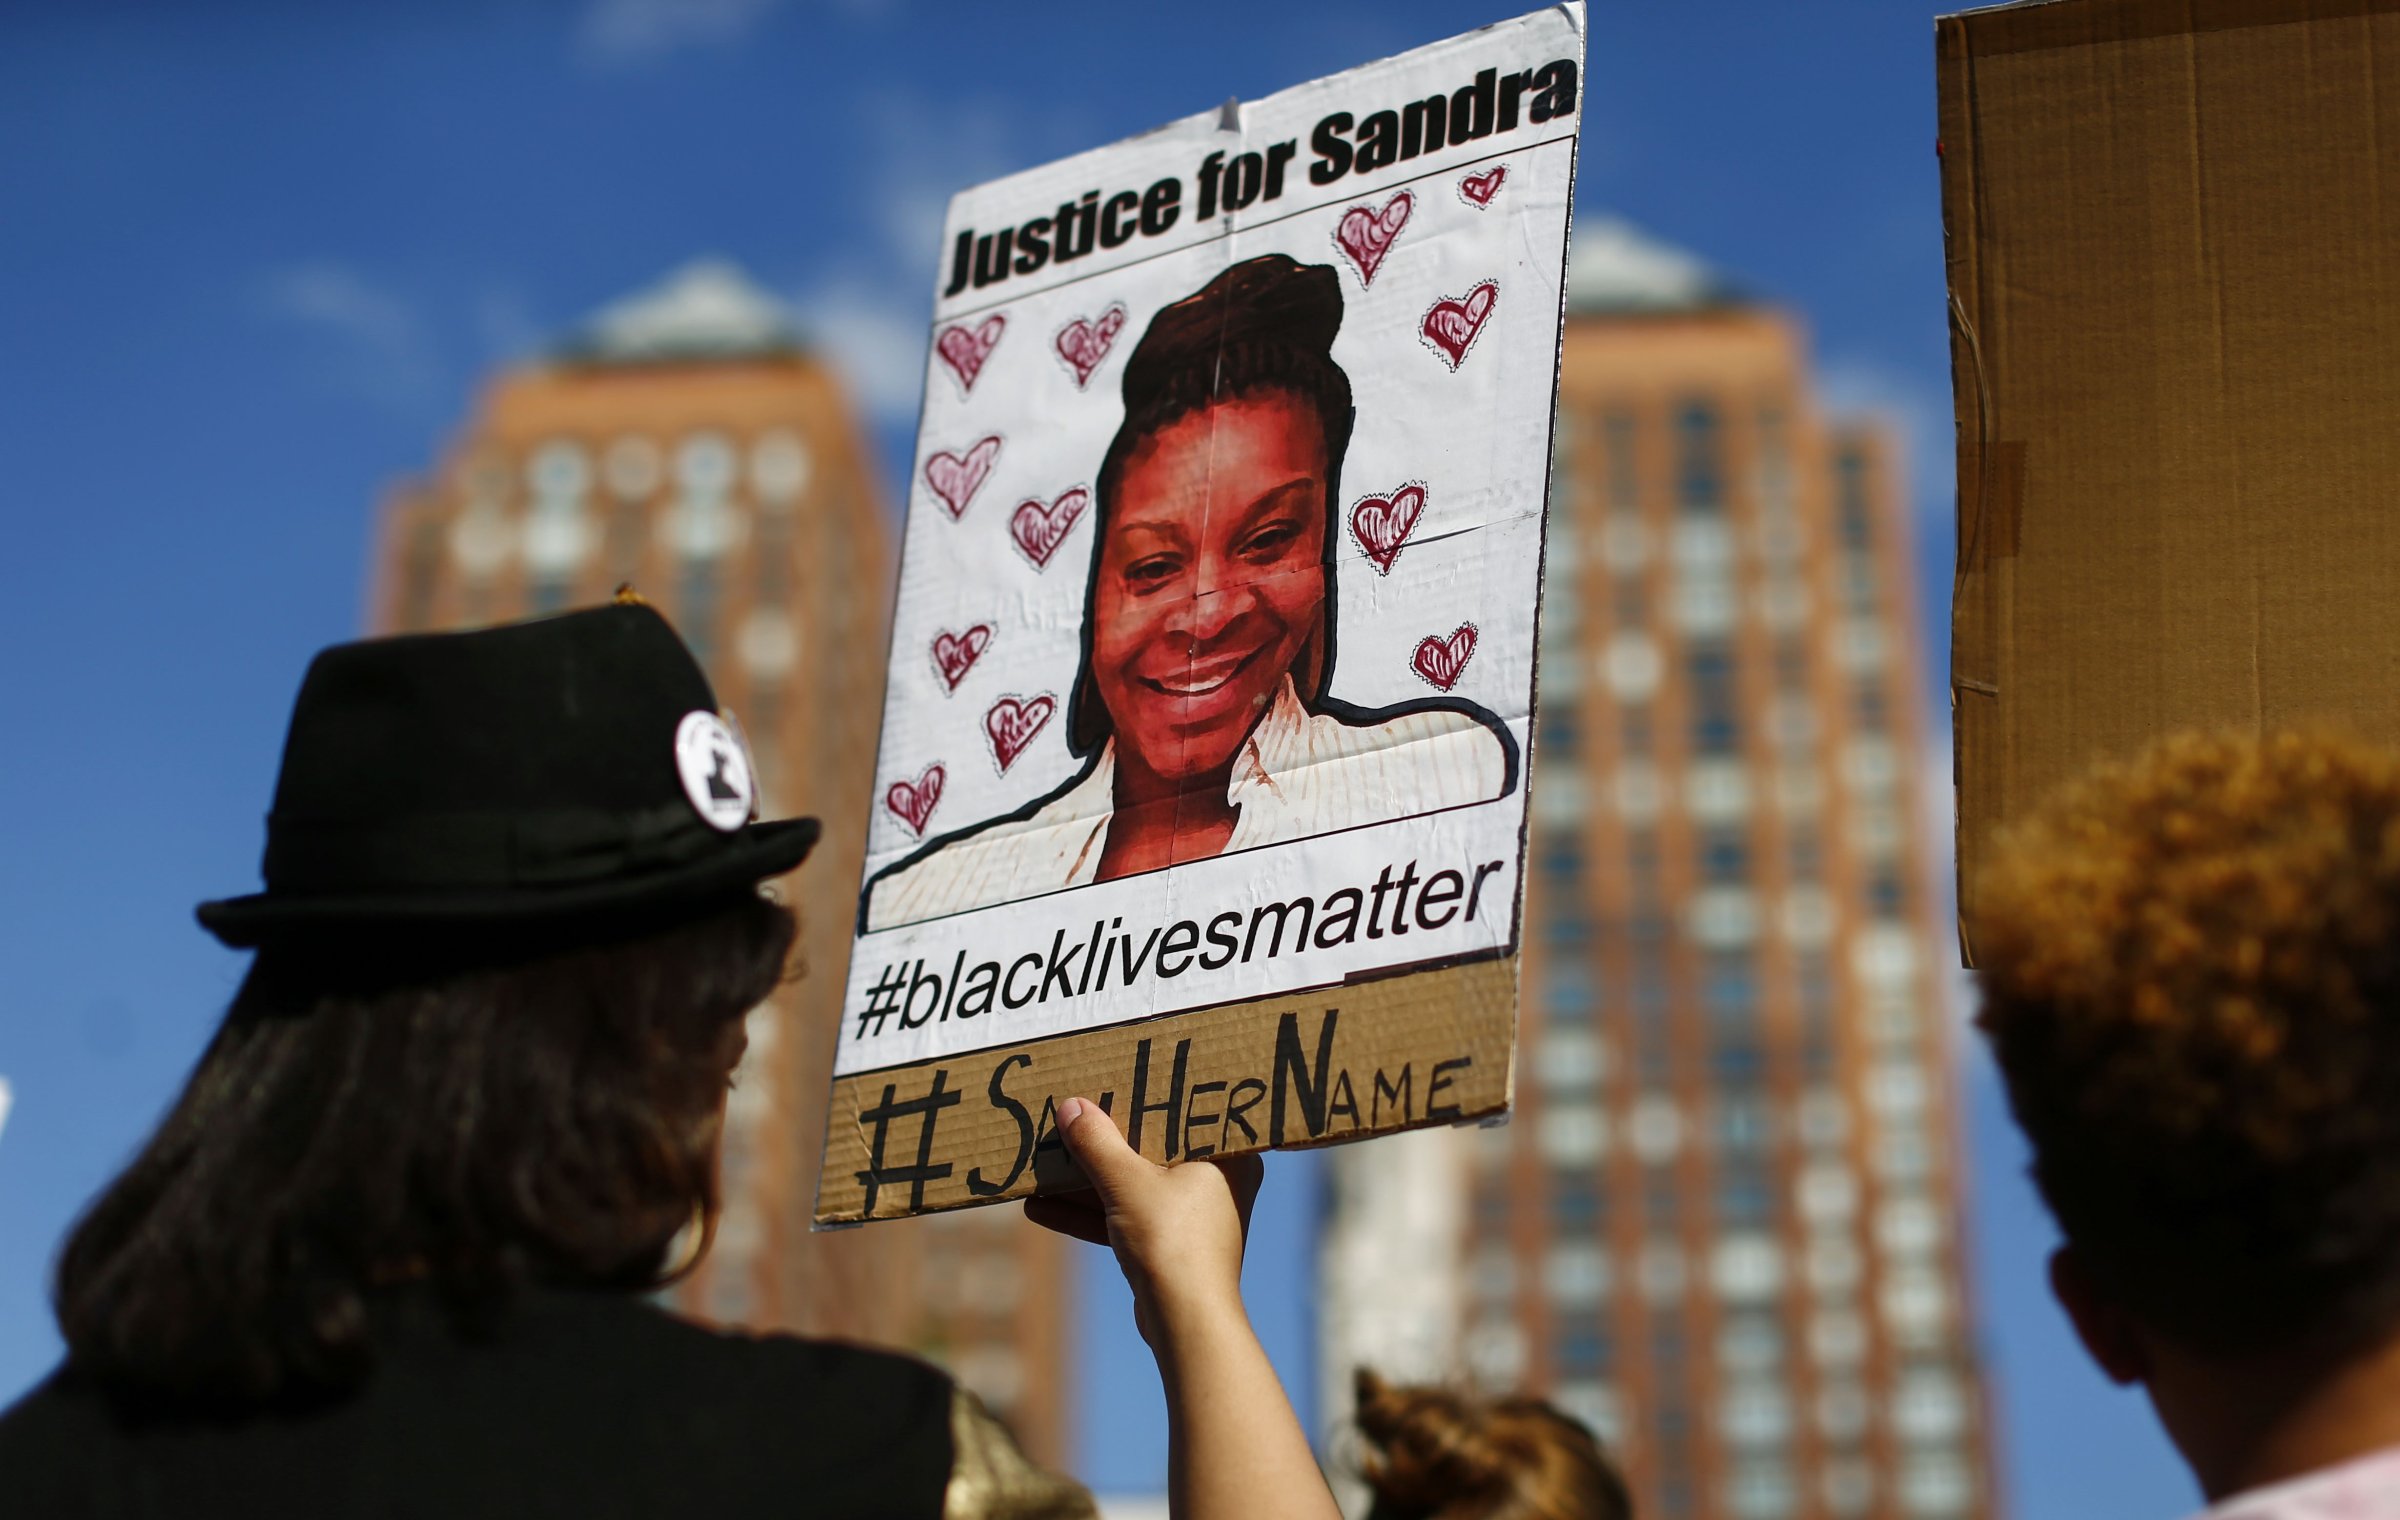 A woman holds a poster bearing the portrait of Sandra Bland, a 28-year-old black woman who killed herself in a Texas jail cell on July 13th, during a Michael Brown memorial rally in Union Square in New York on Aug. 9, 2015.